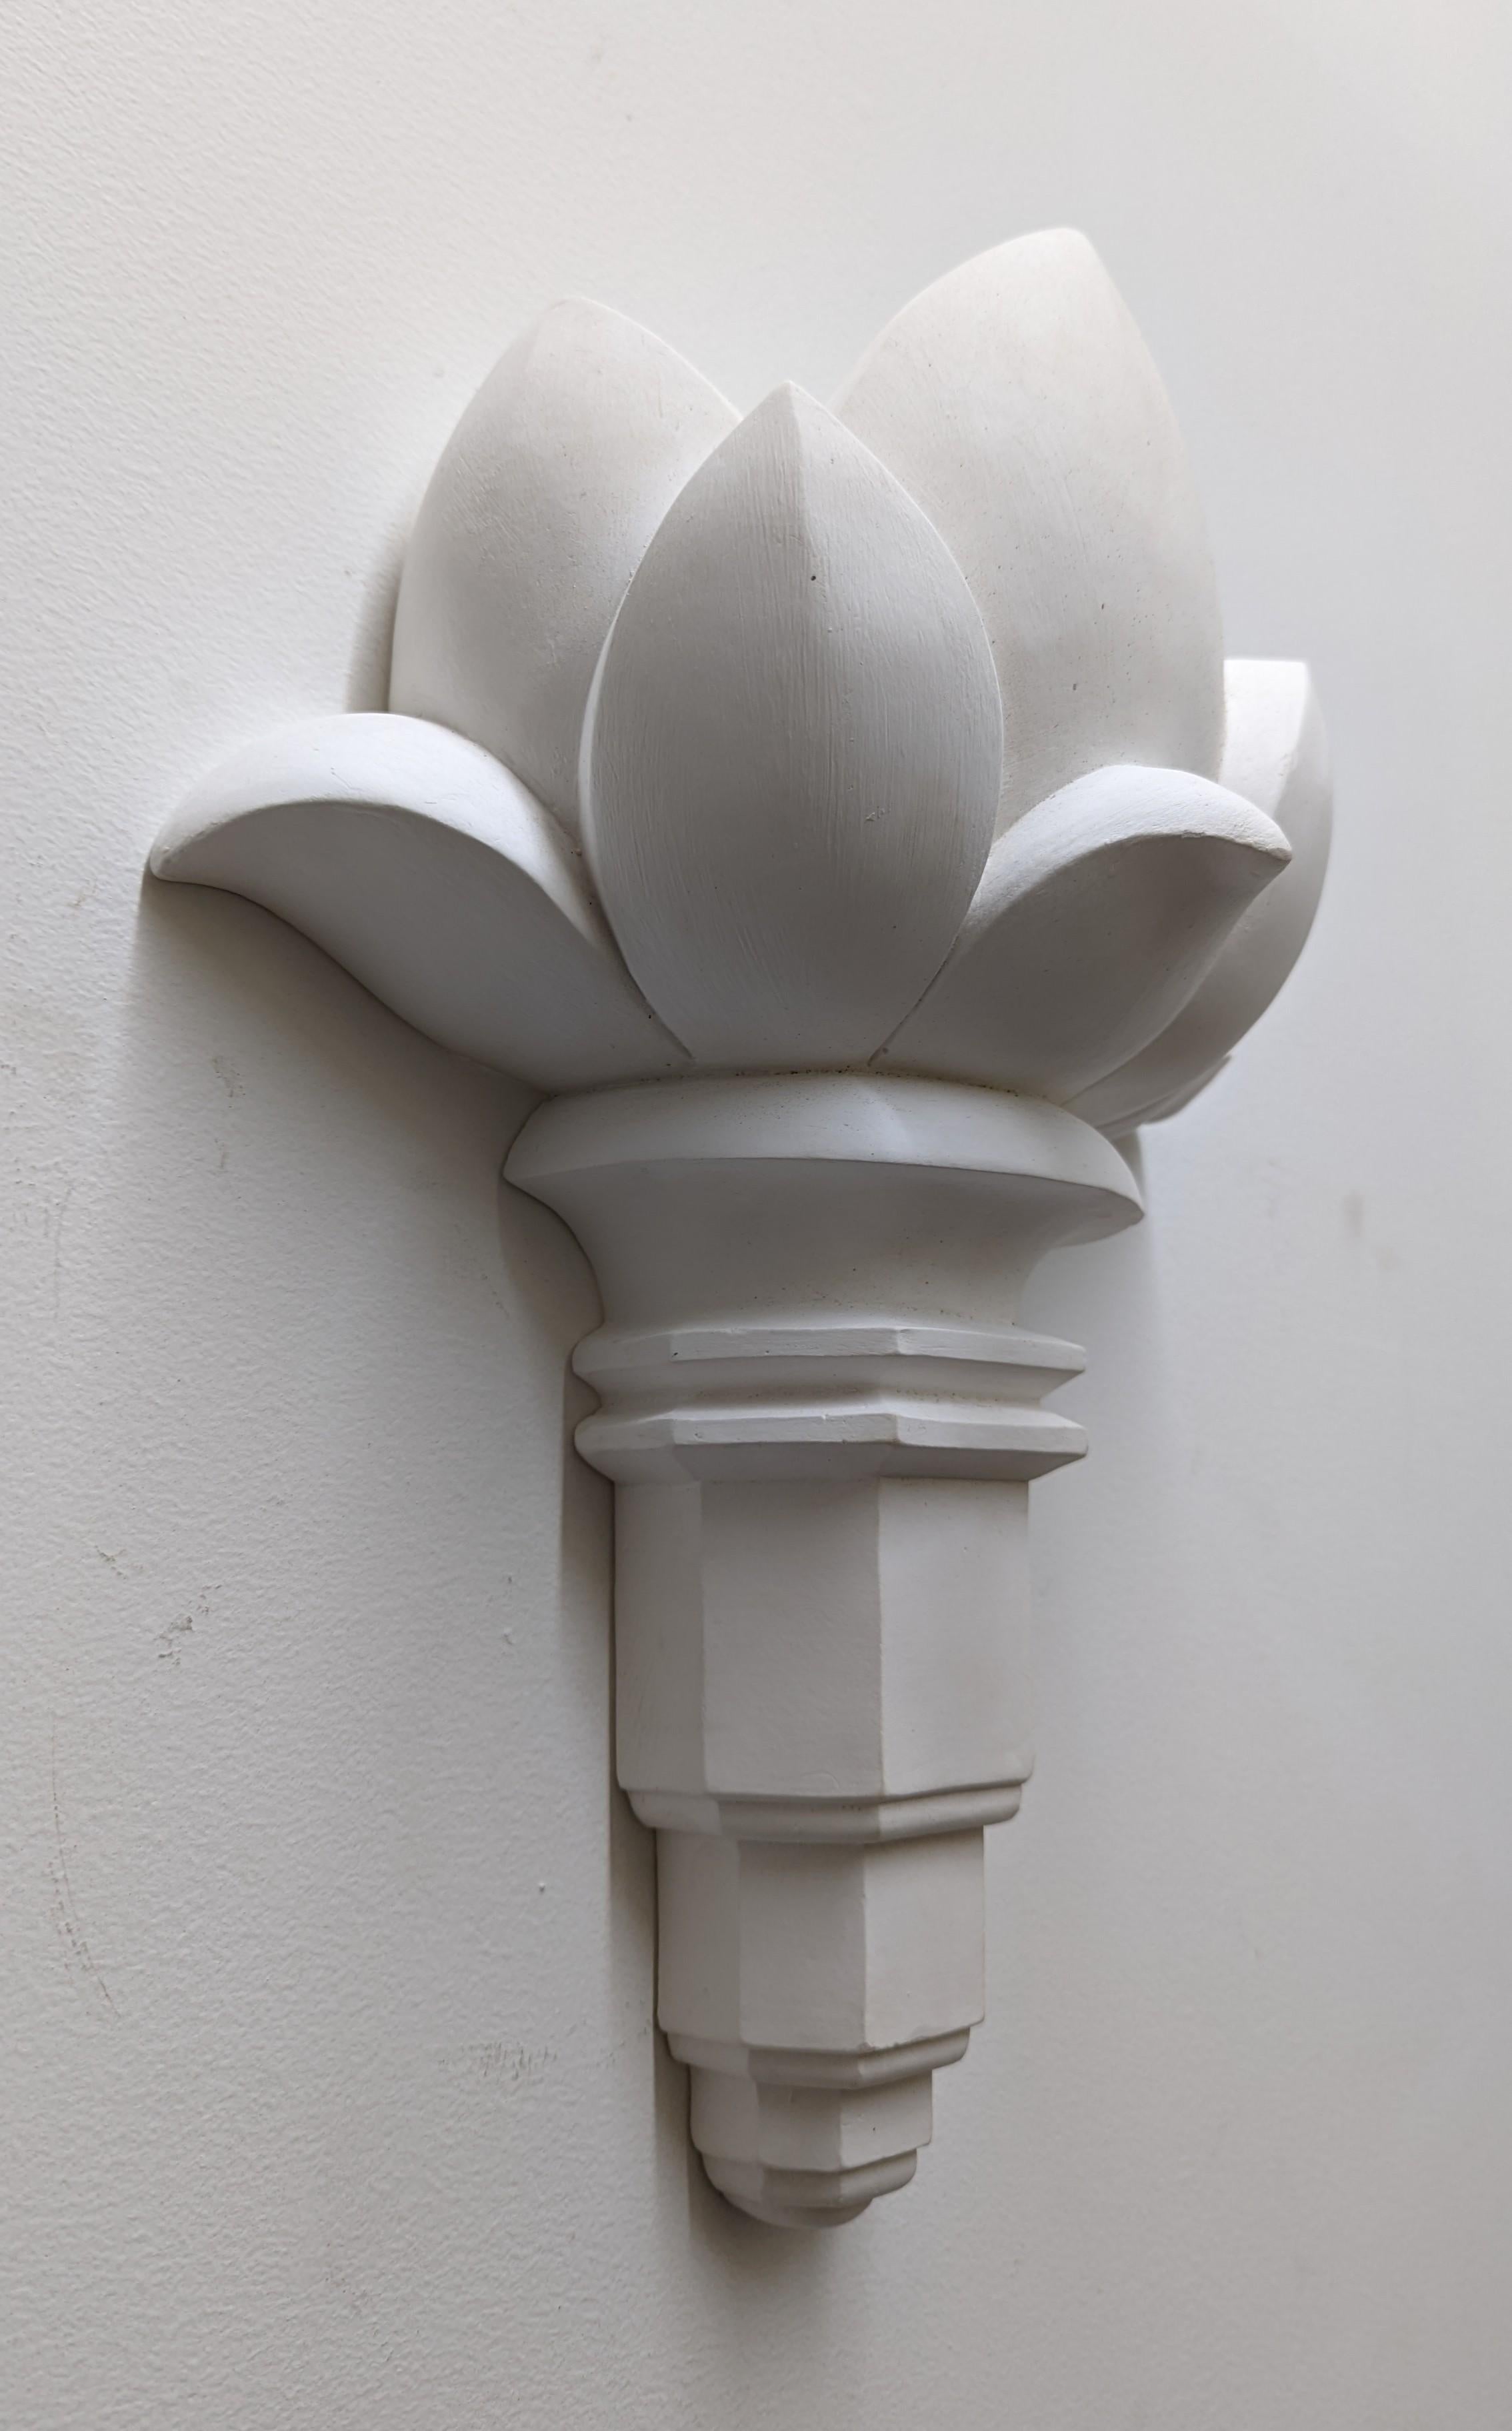 French Art Deco Wall Sconces by Bourgeois Boheme Atelier In Good Condition For Sale In Long Island City, NY